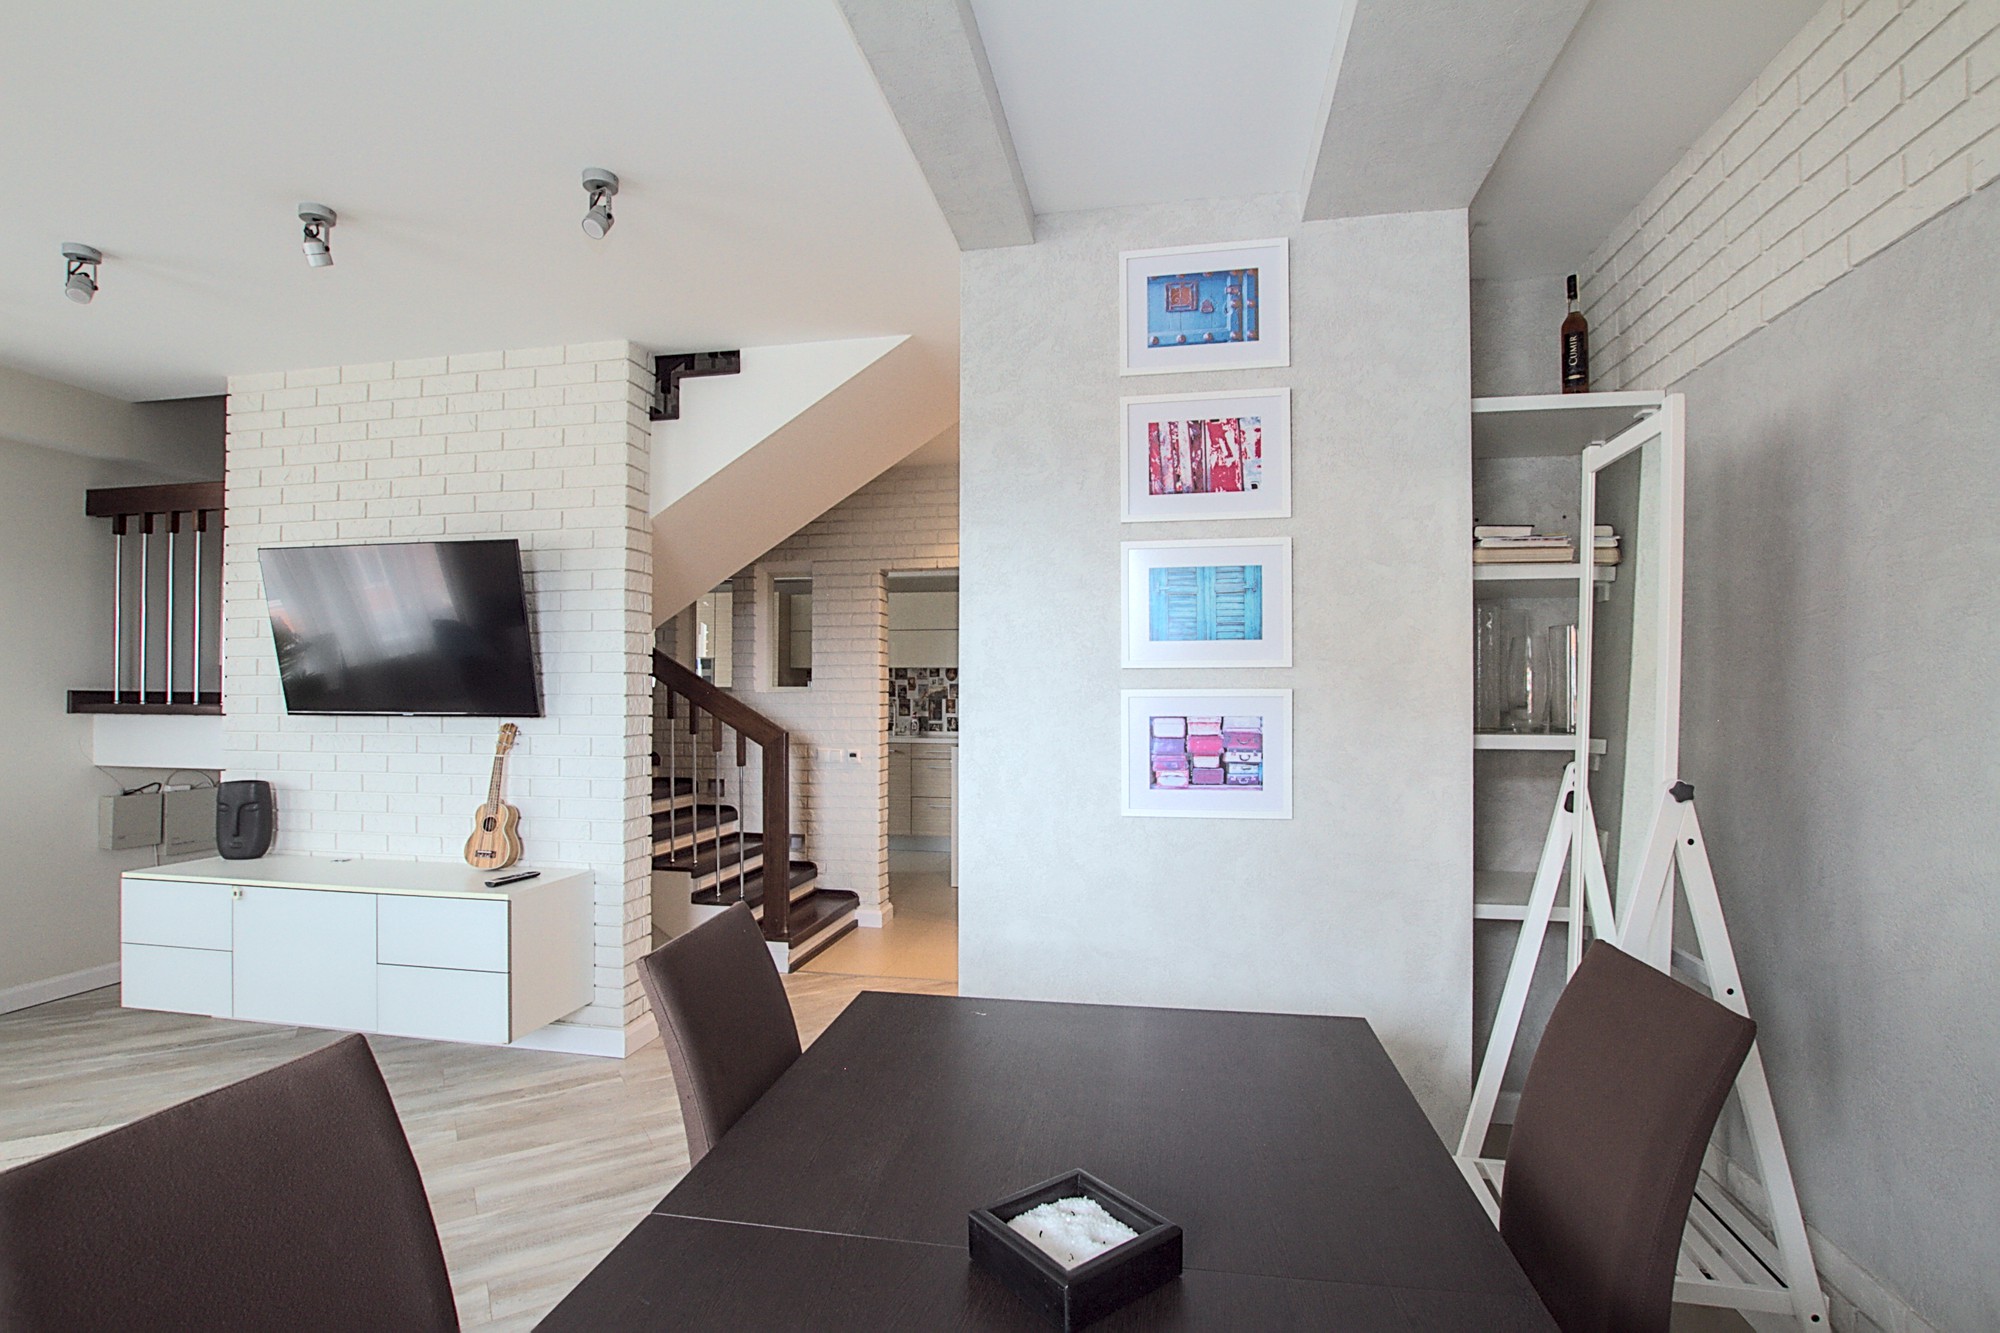 Center Penthouse is a 3 rooms apartment for rent in Chisinau, Moldova